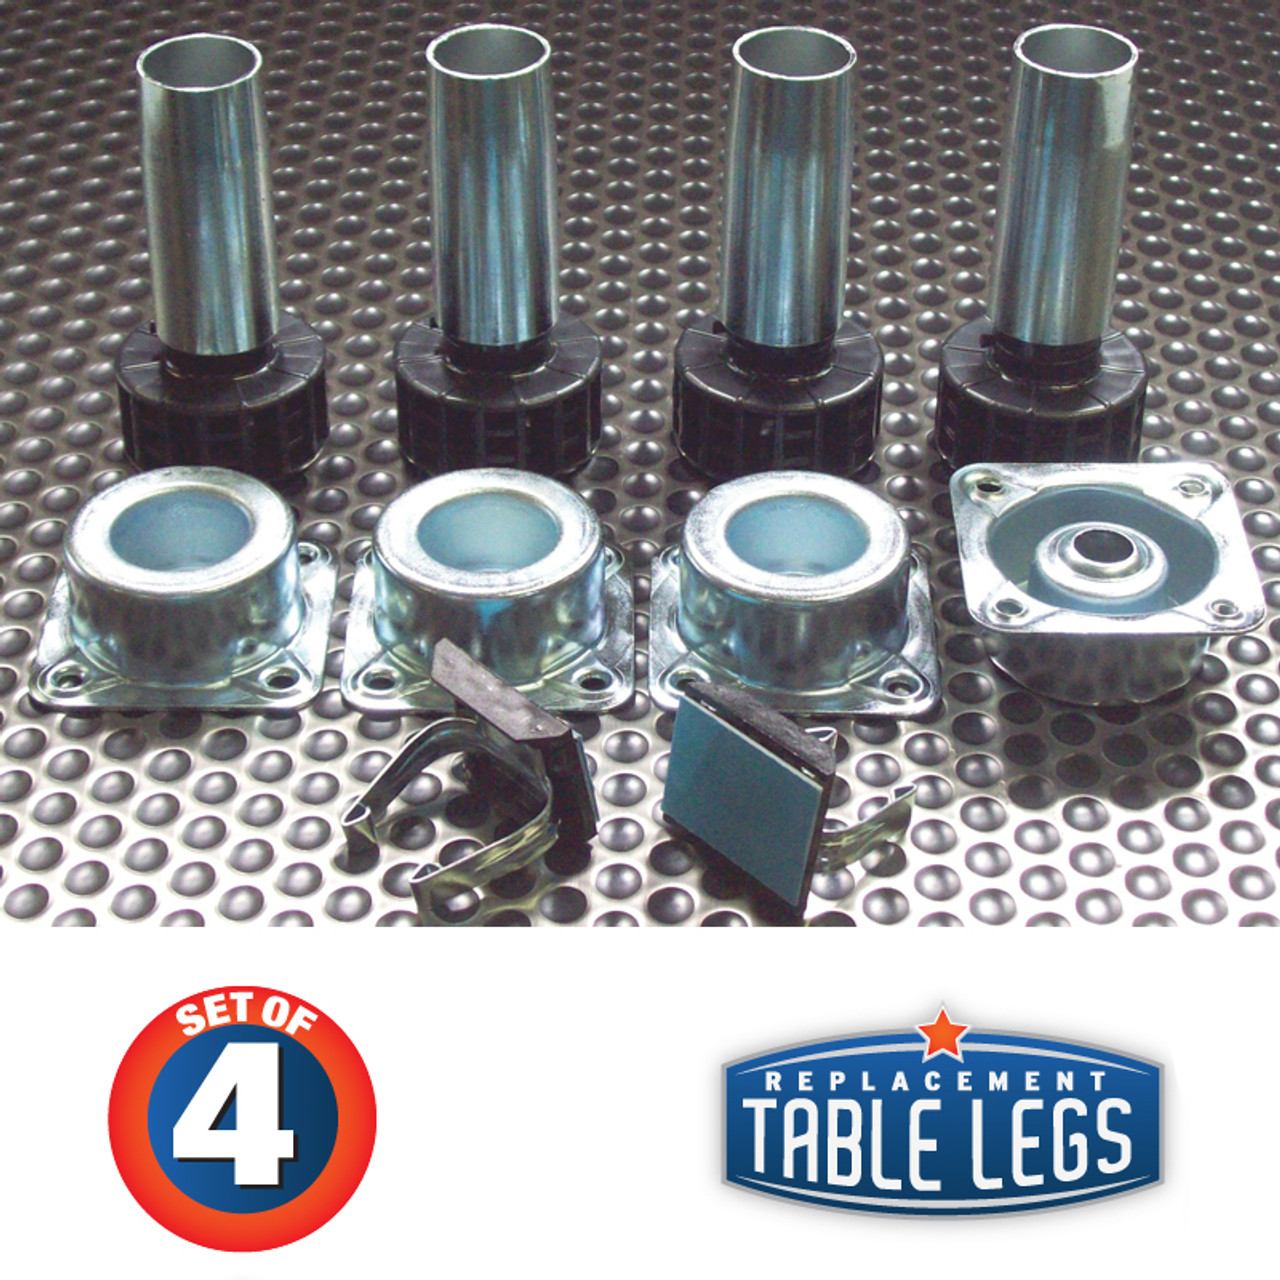 SET OF 4, 2 piece  Metal levelers, 3-3/4"-4-3/4", with 1" ABS adjustable foot, 4 metal sockets, and 2 adhesive toe kick clips